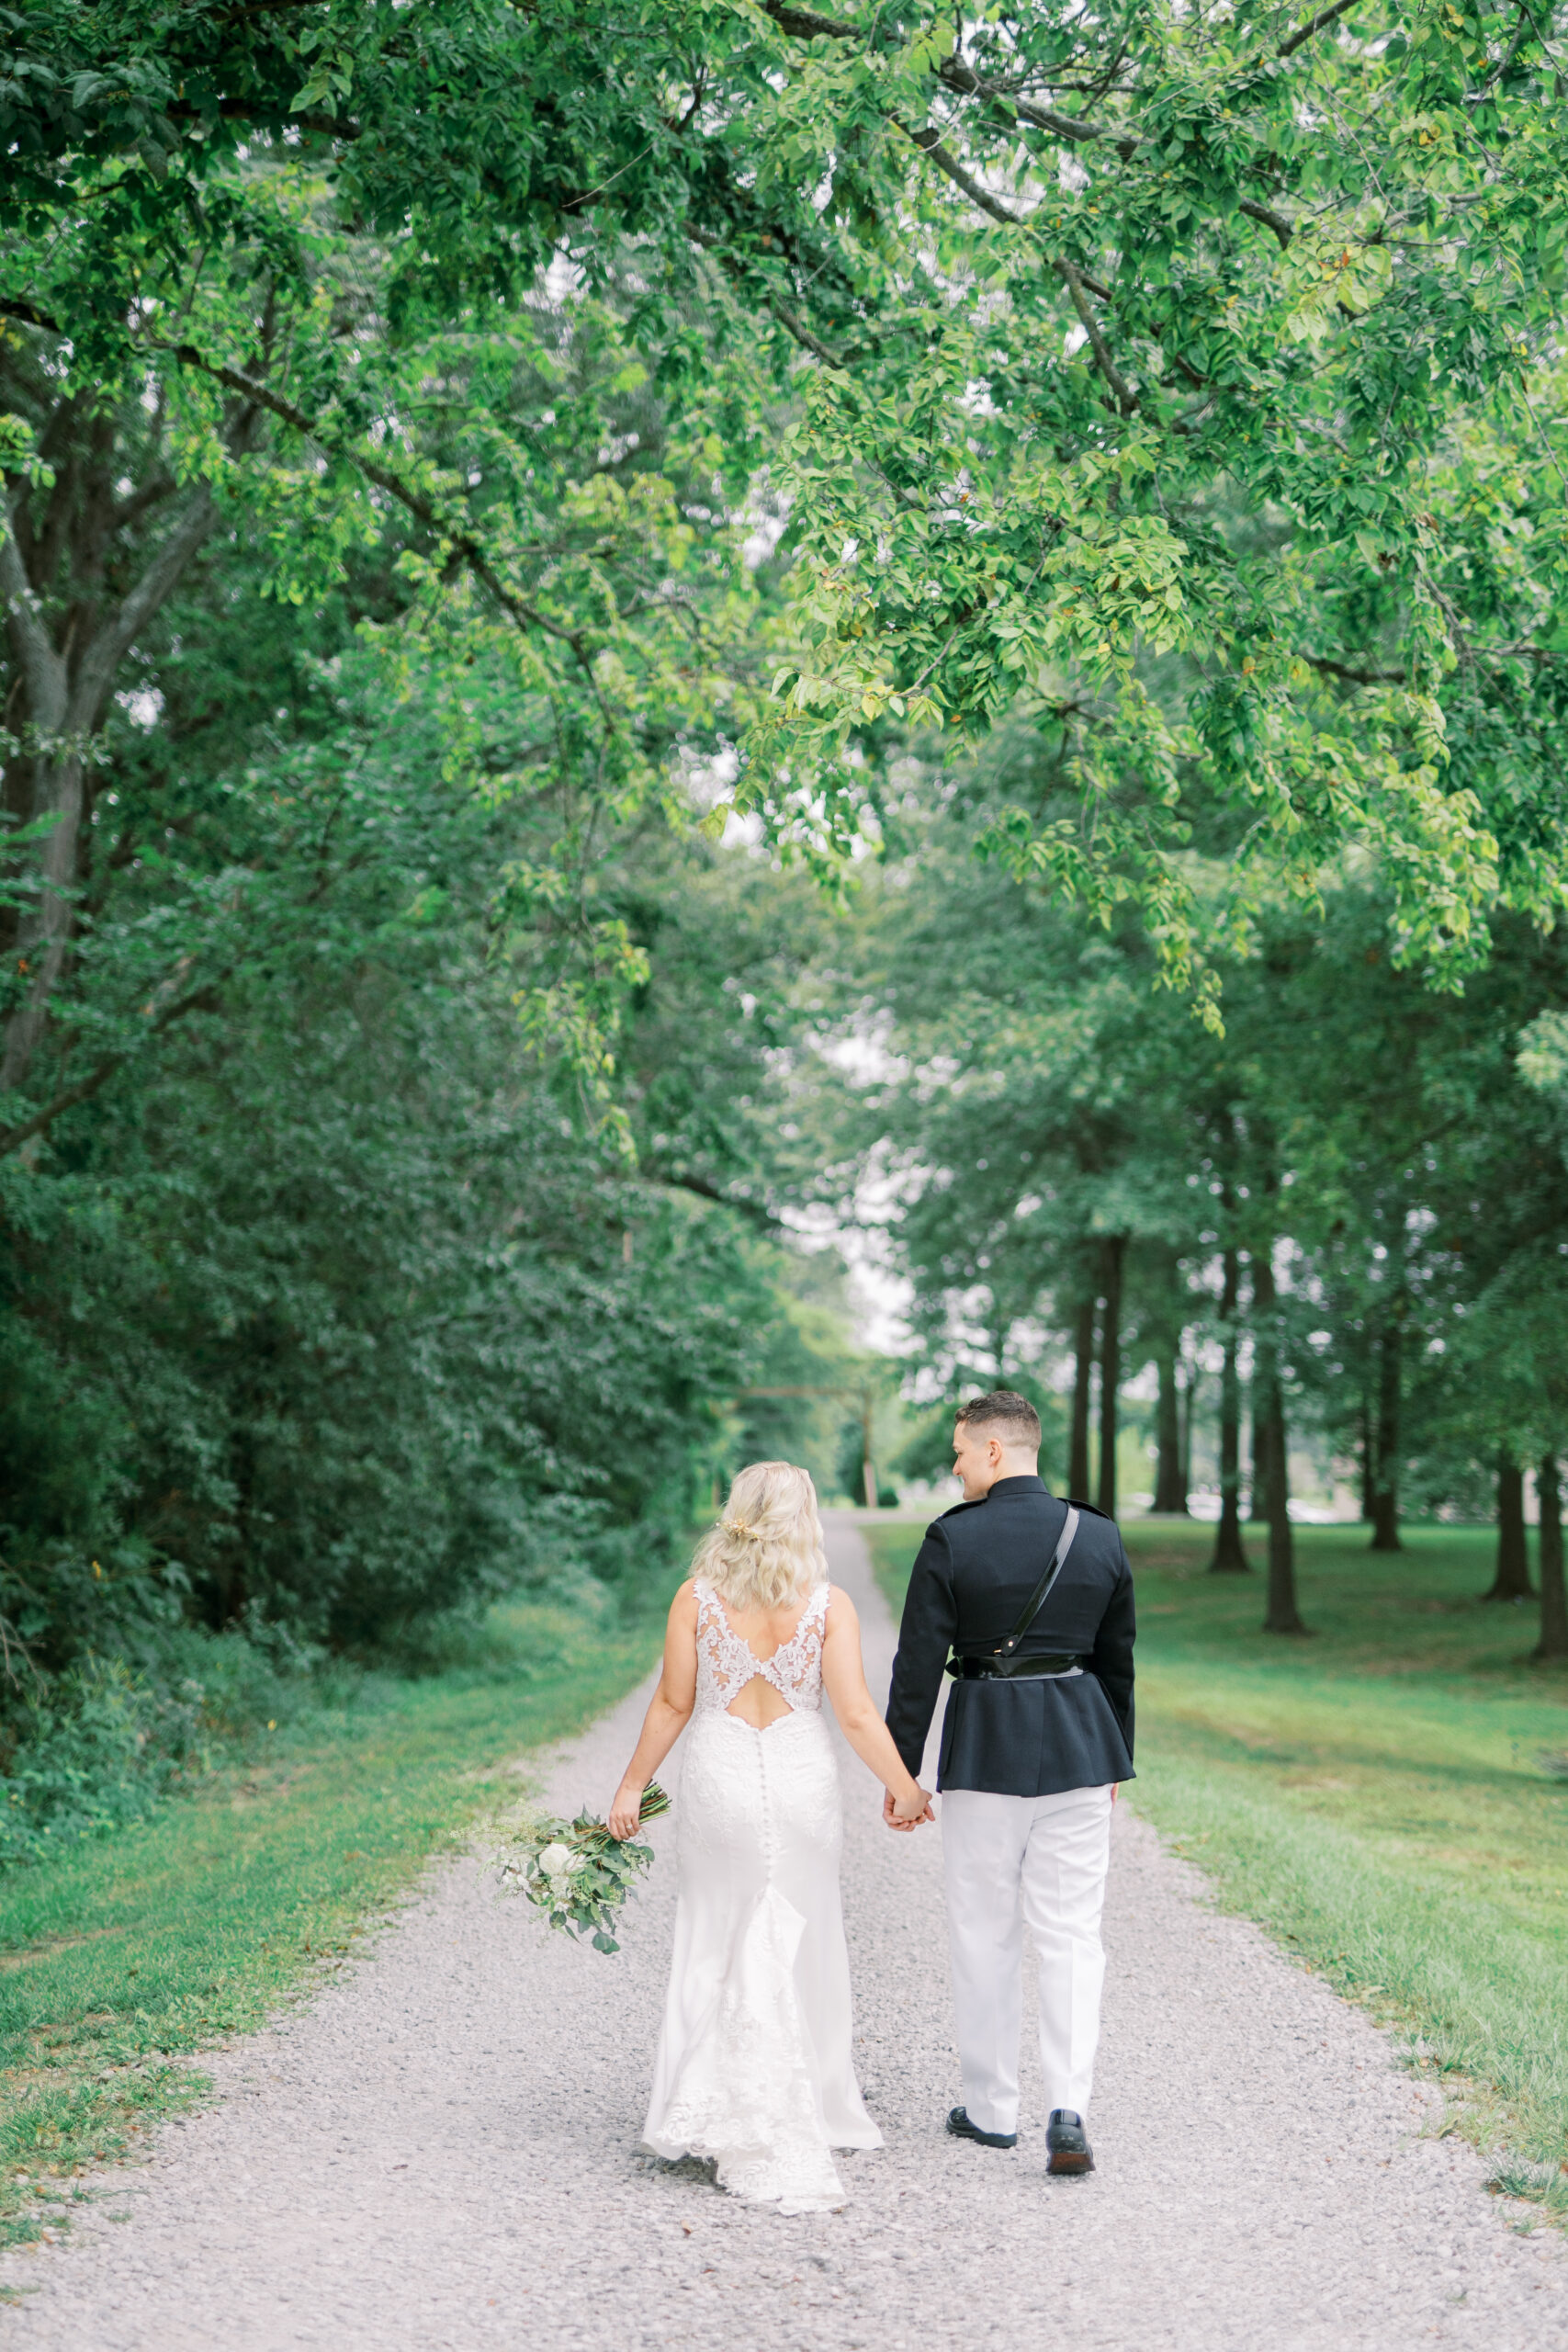 Bride and groom walking along a shaded road under trees at their wedding